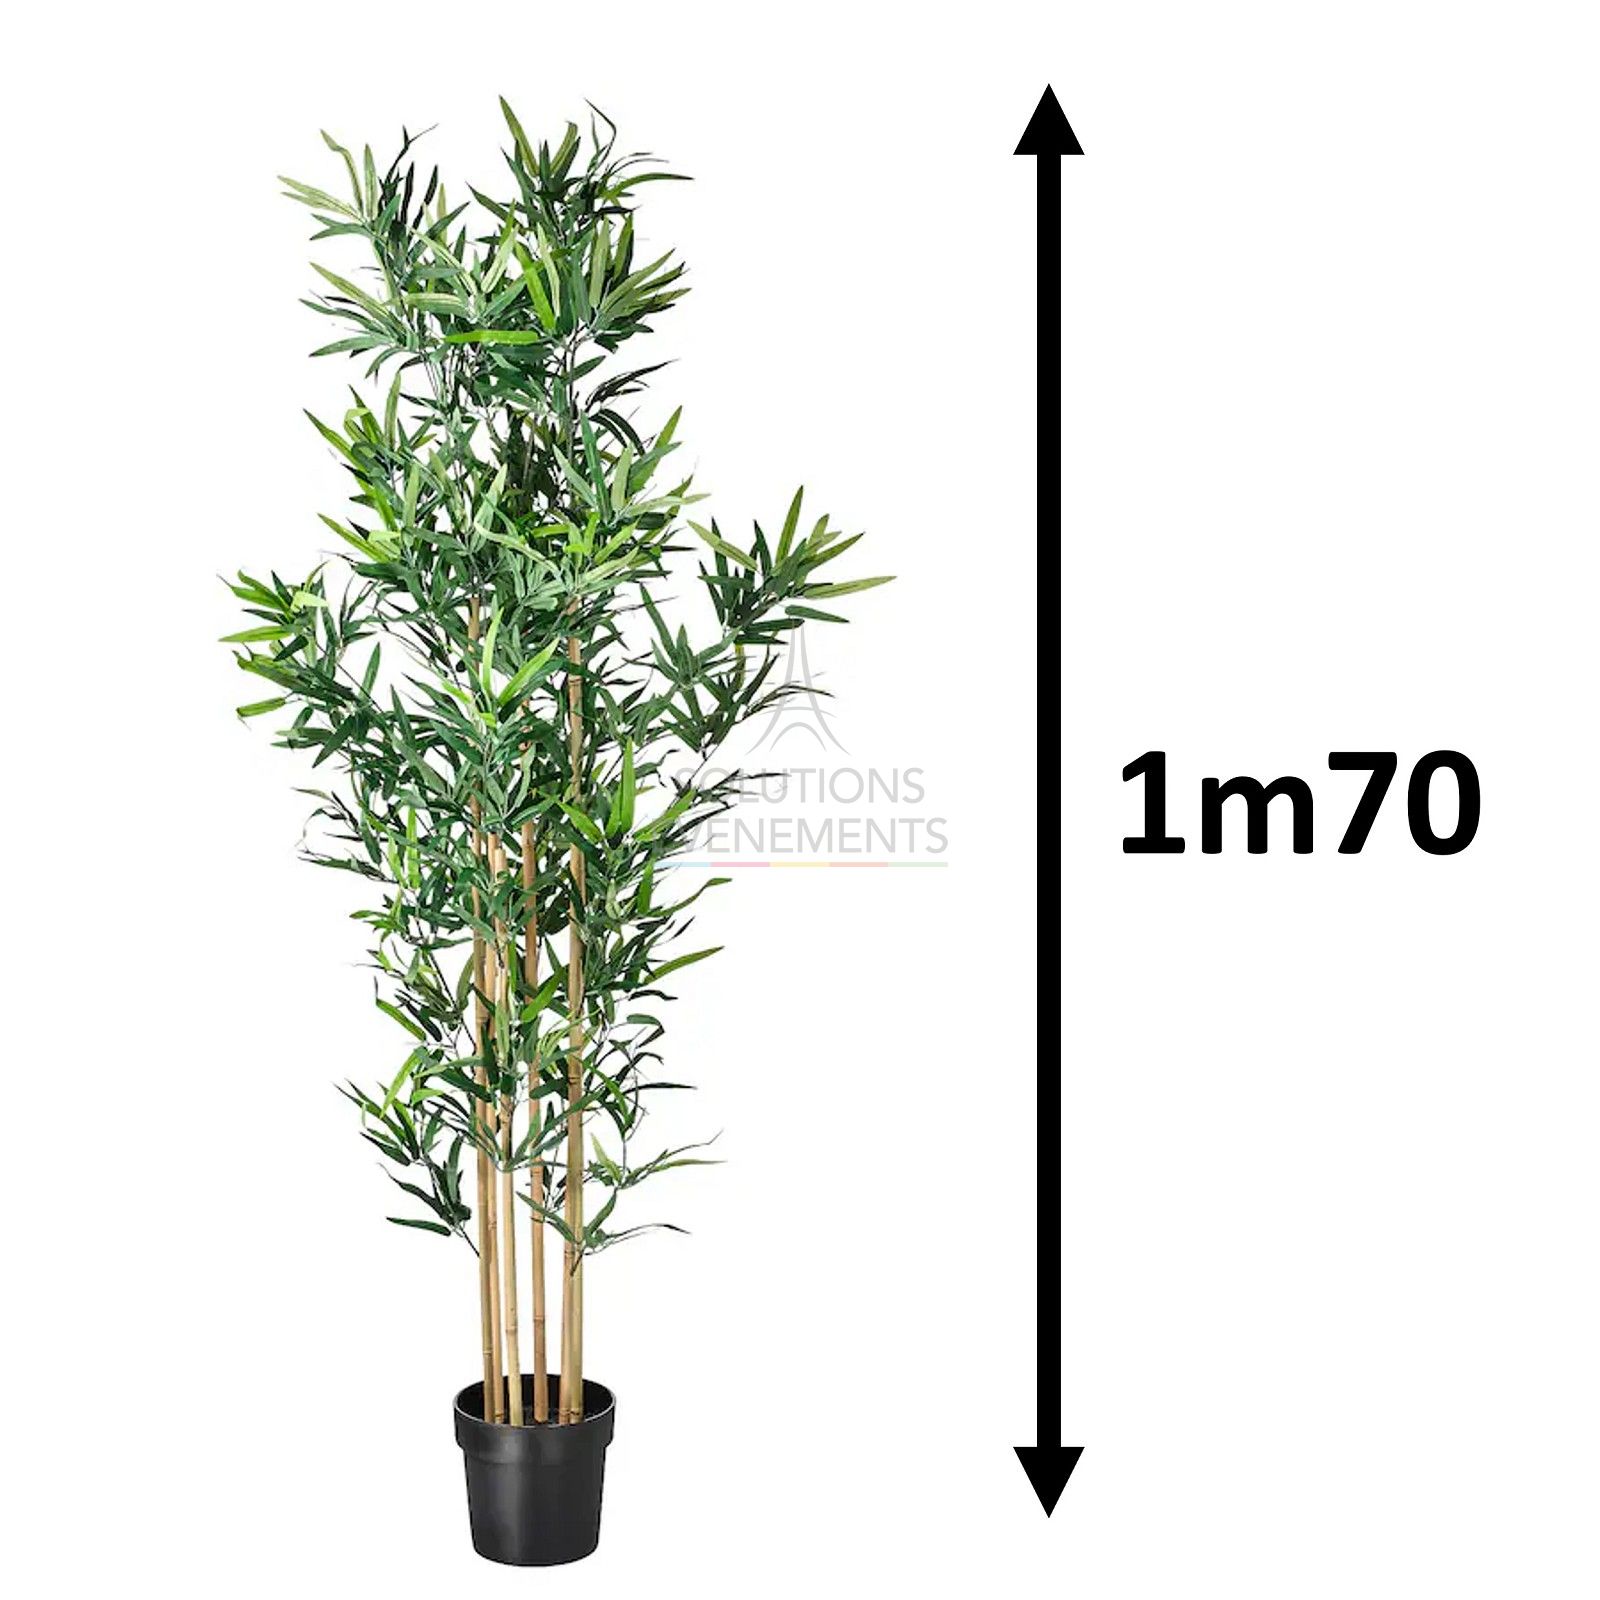 Rental of decorative bamboo for events and trade fairs